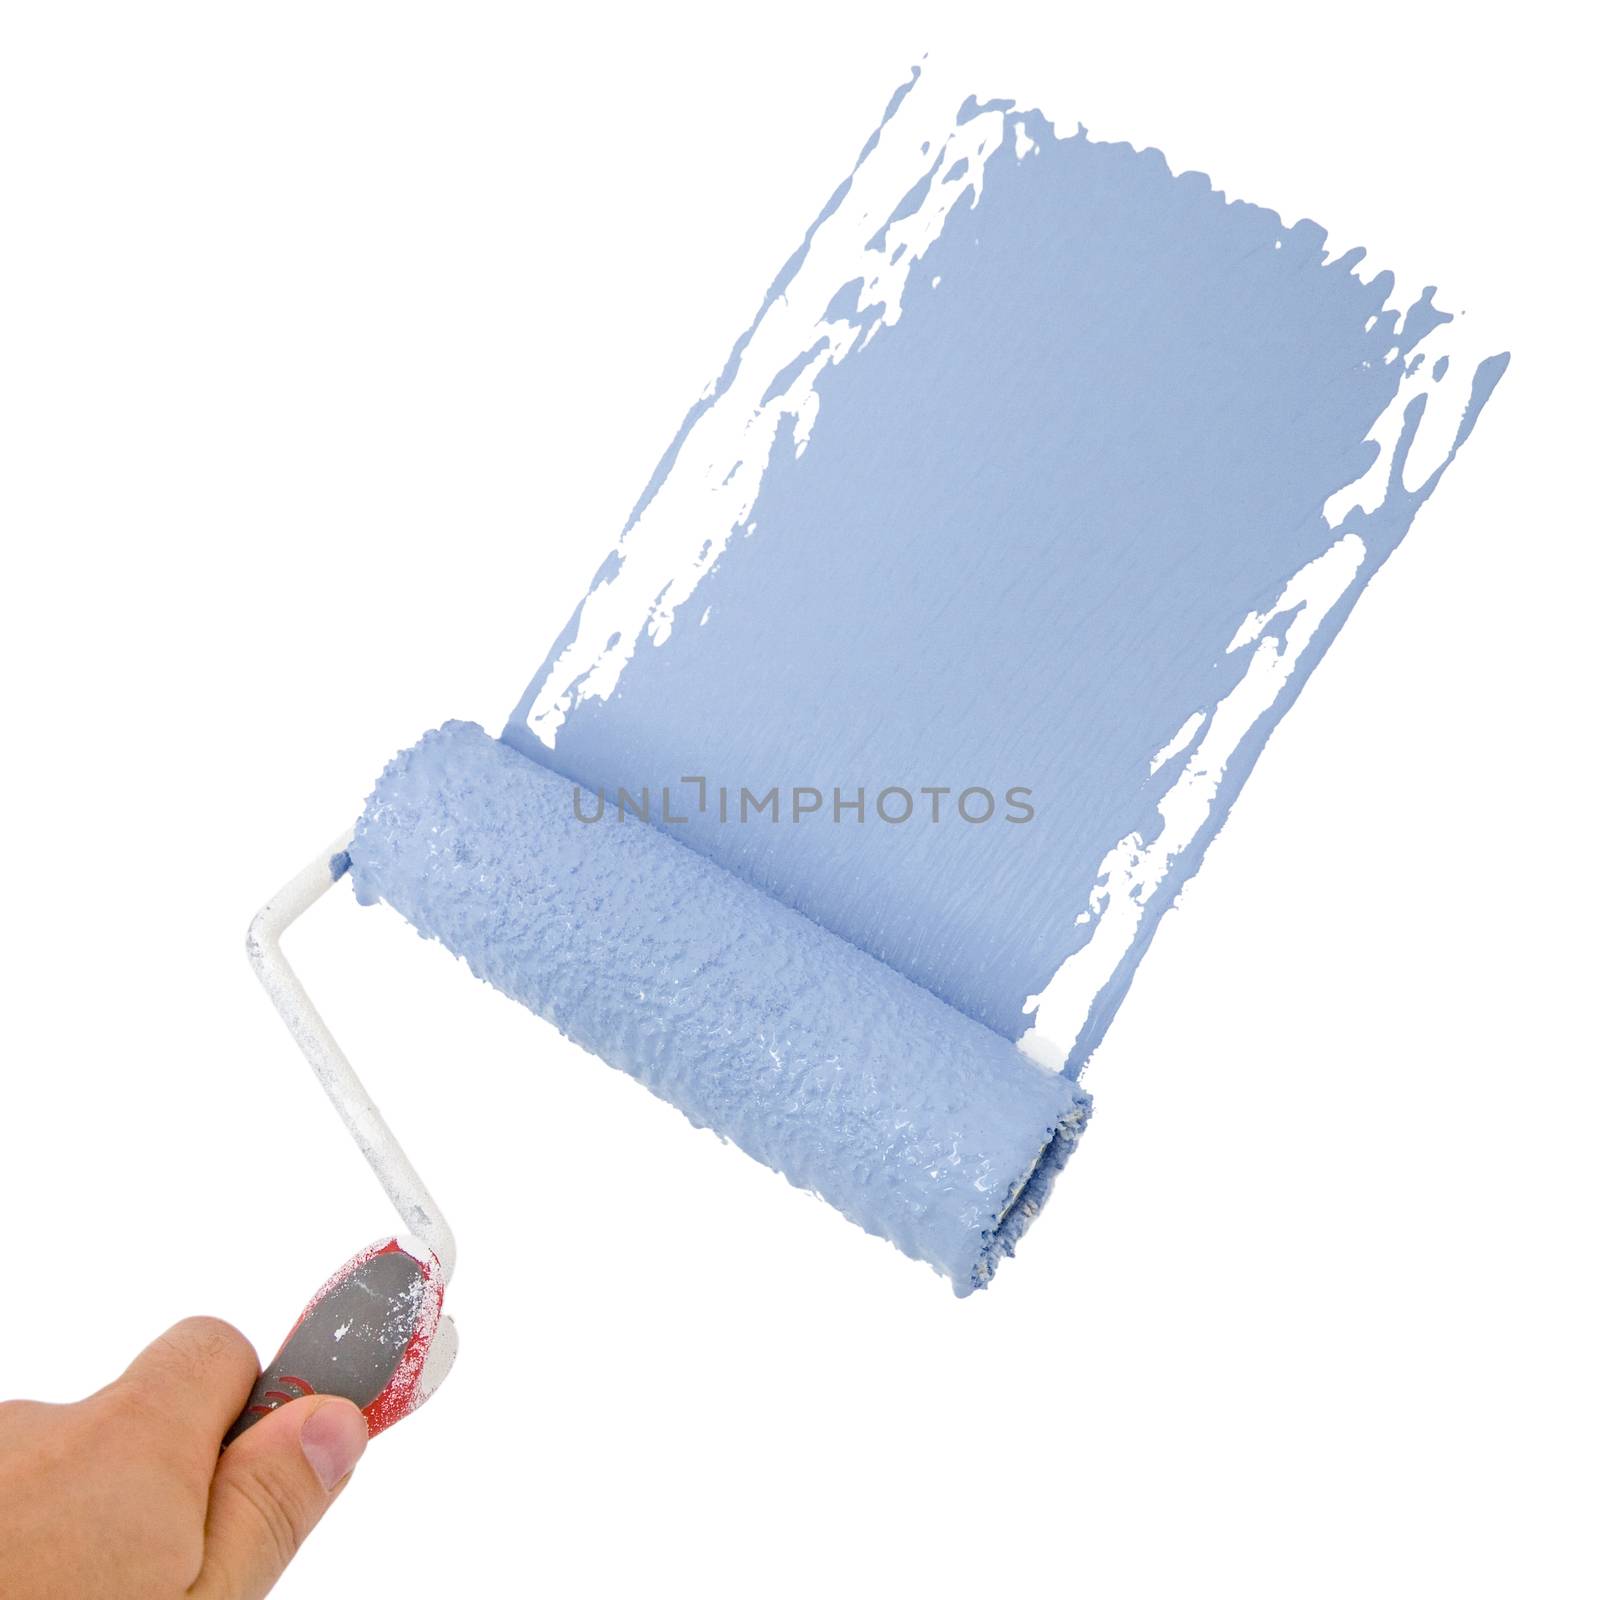 Painter holding a roller, painting in blue